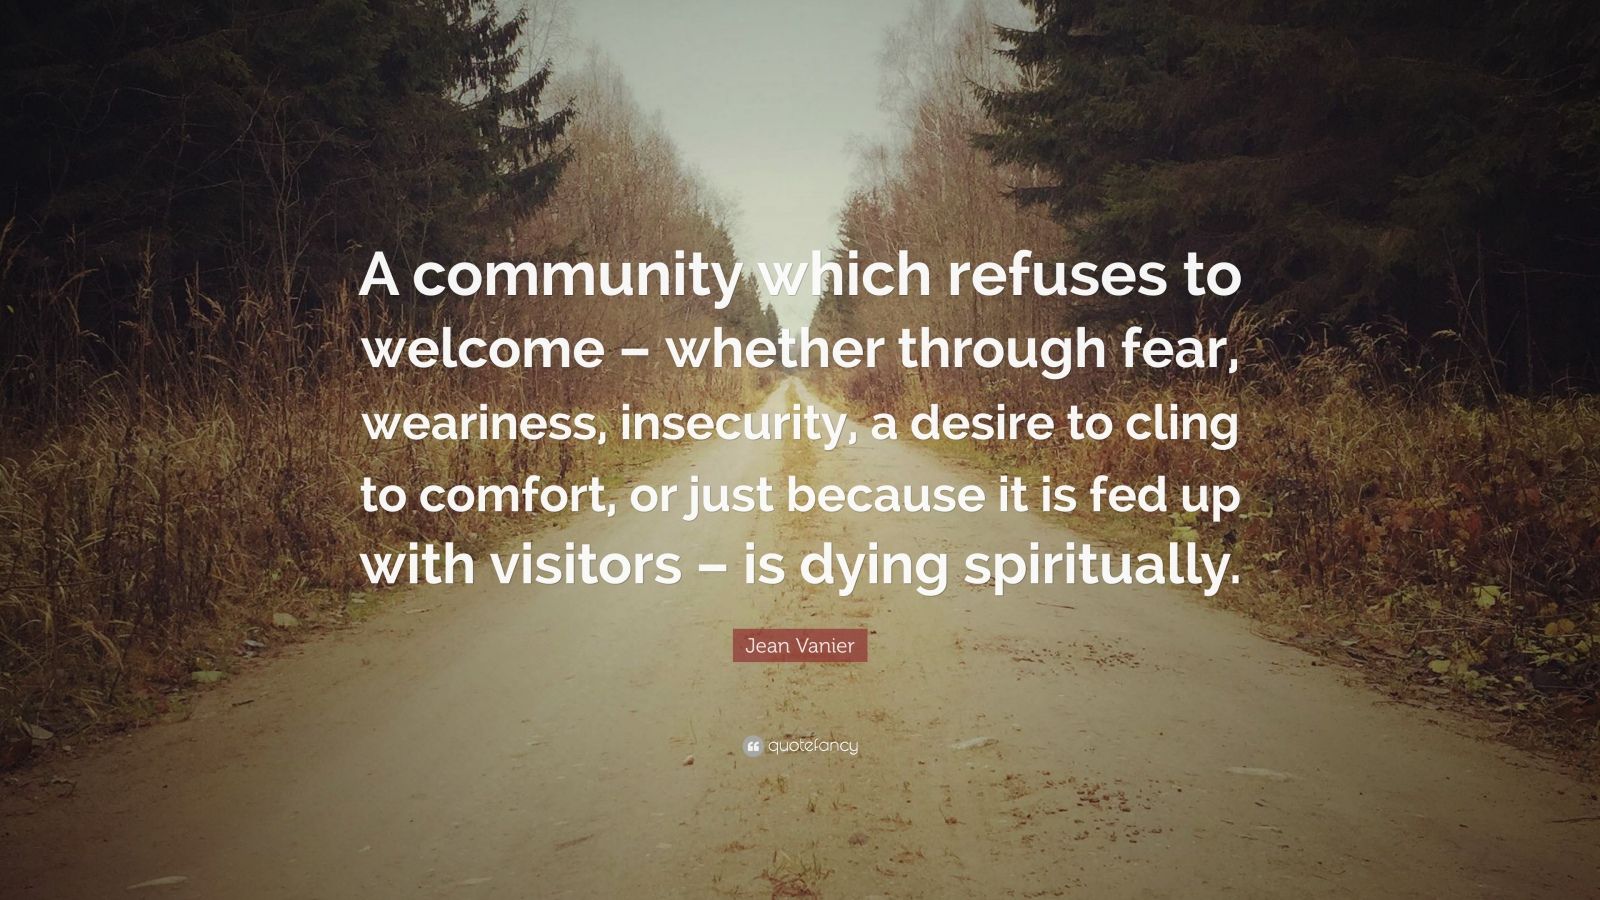 community and growth by jean vanier